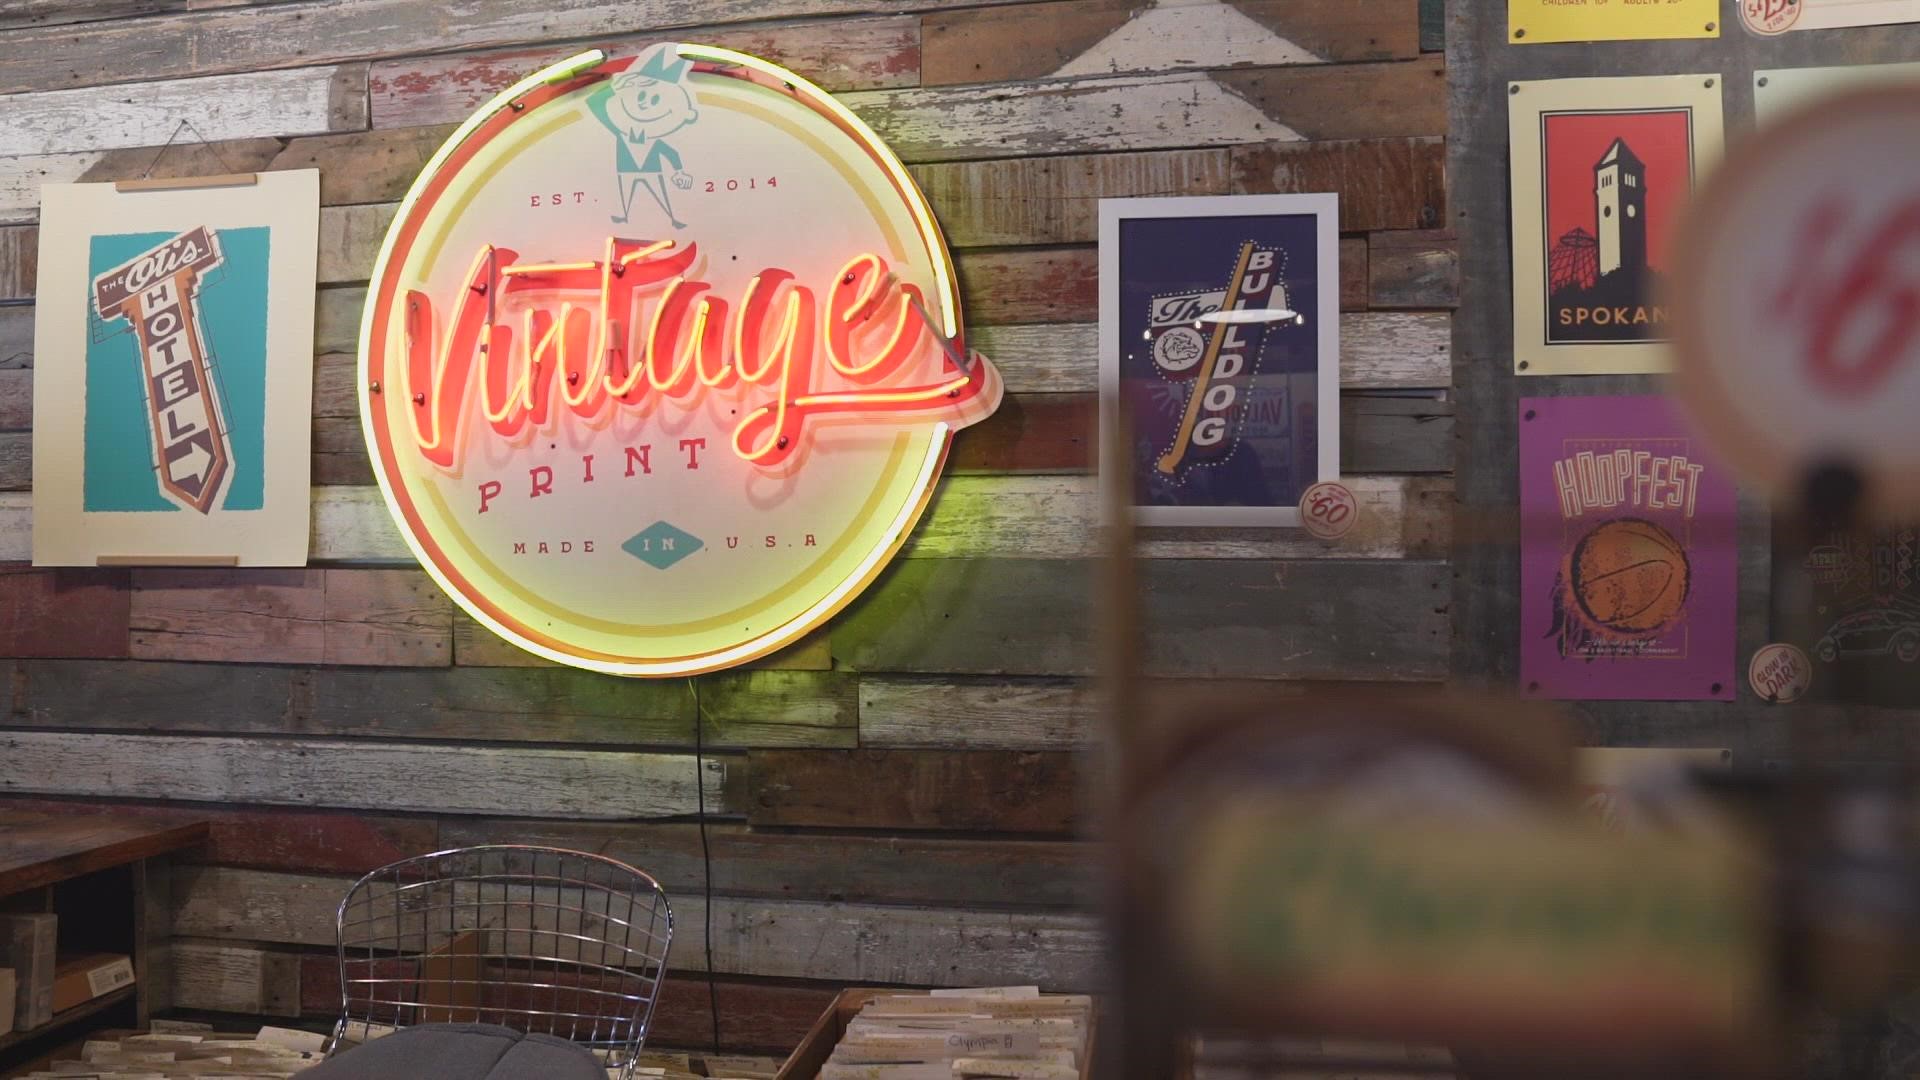 Vintage Print is celebrating the grand opening of its new storefront in Spokane's Garland District.